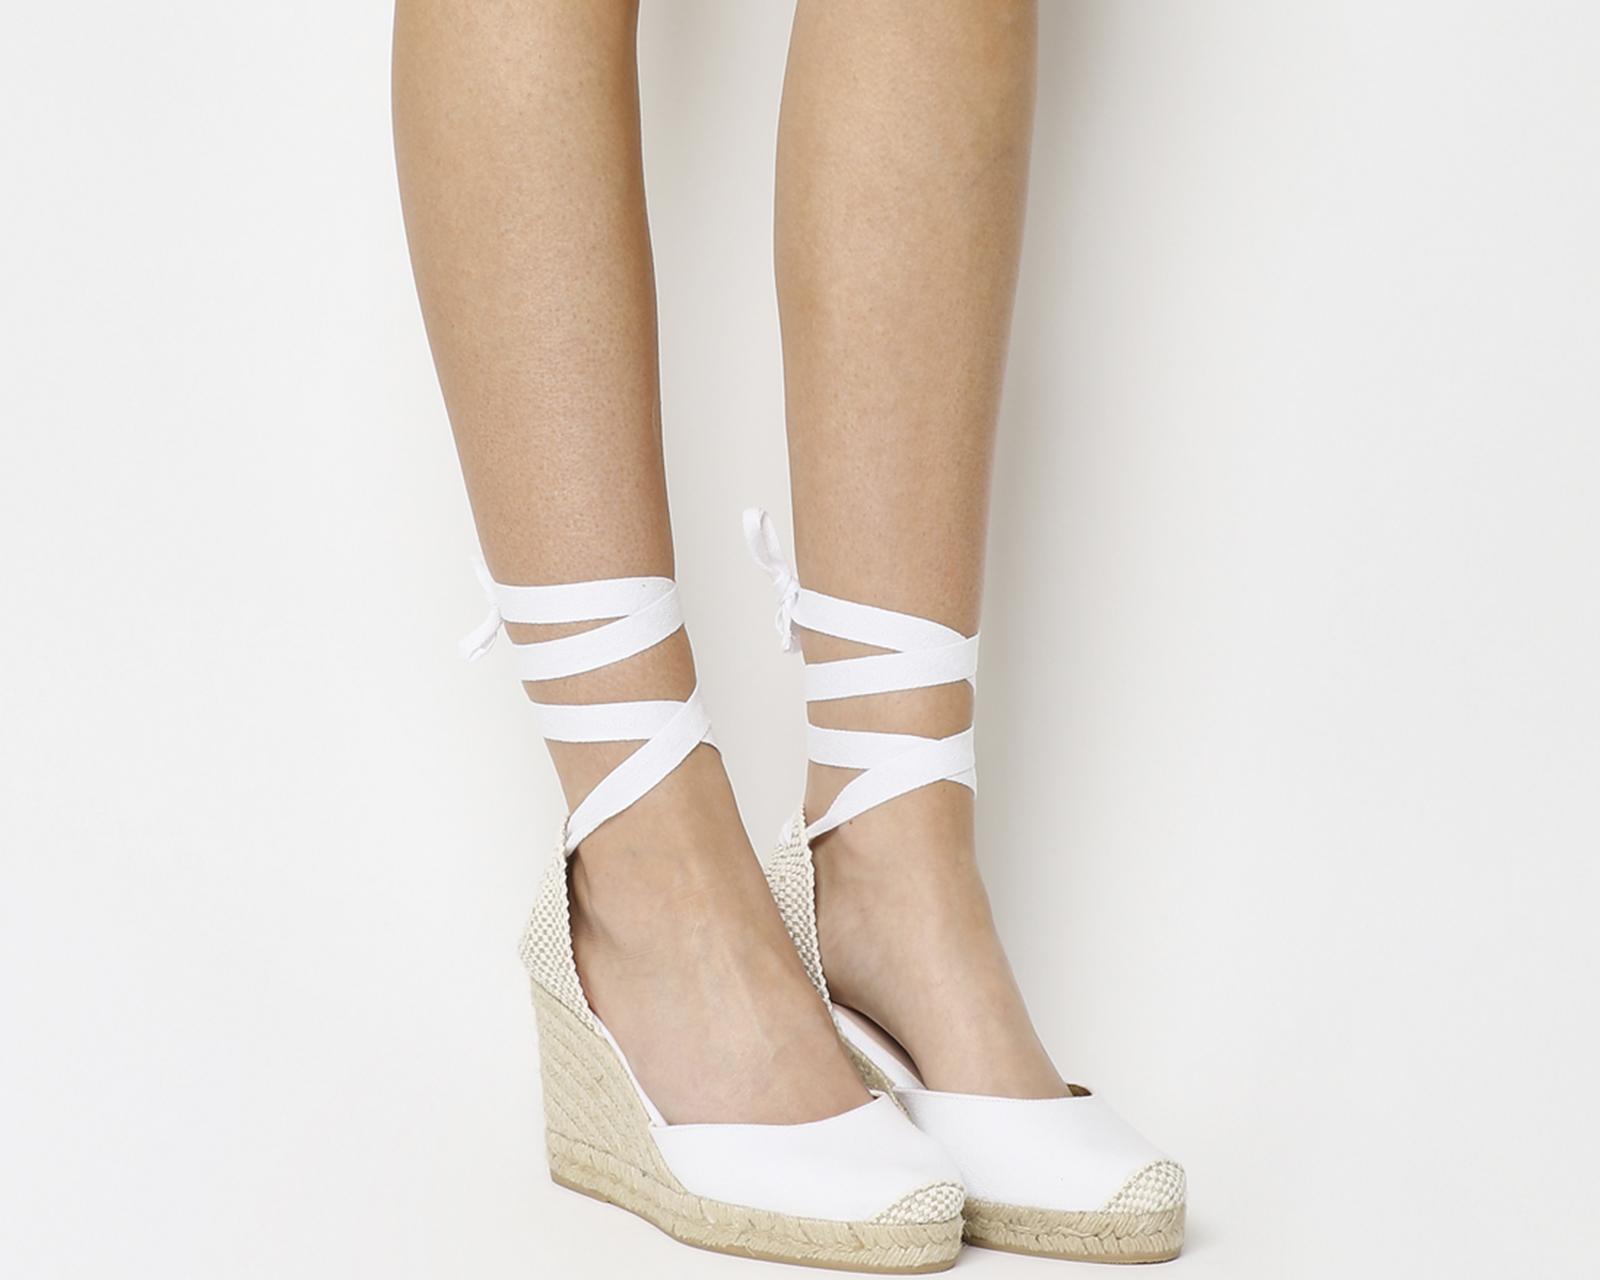 office marmalade espadrille wedges